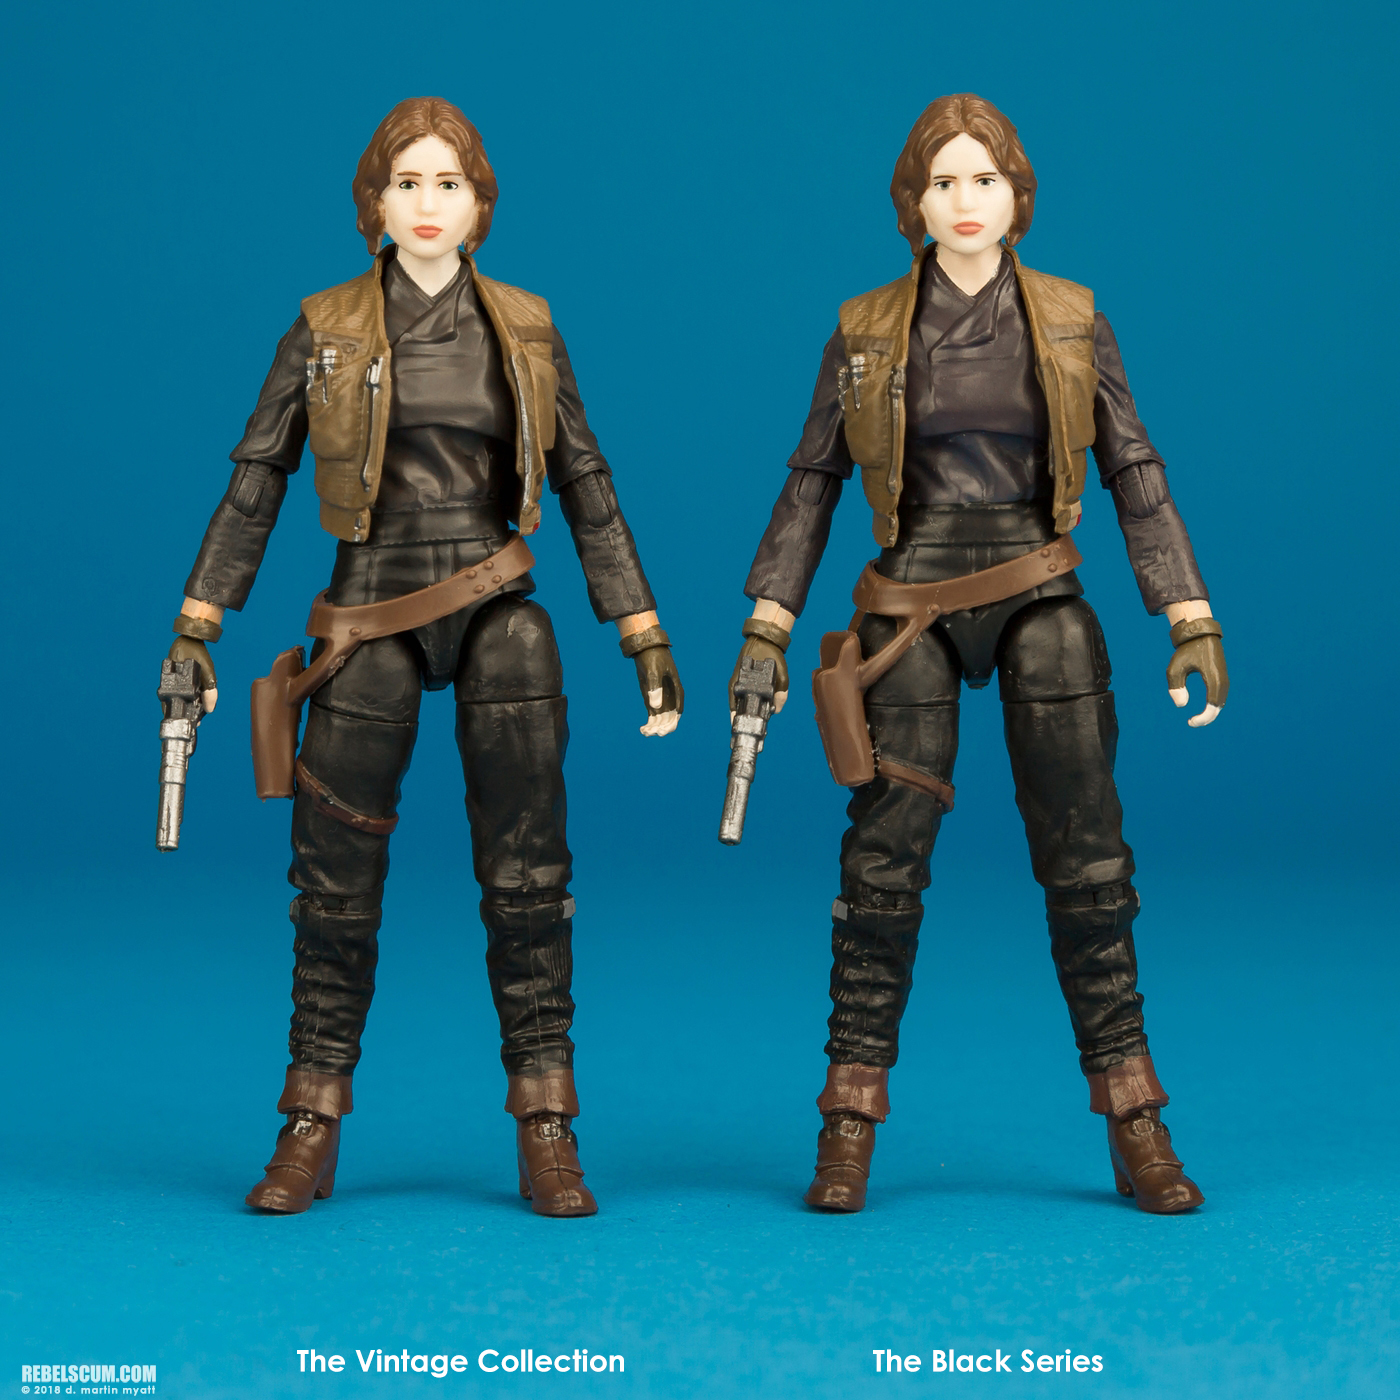 VC119-Jyn-Erso-The-Vintage-Collection-Hasbro-013.jpg